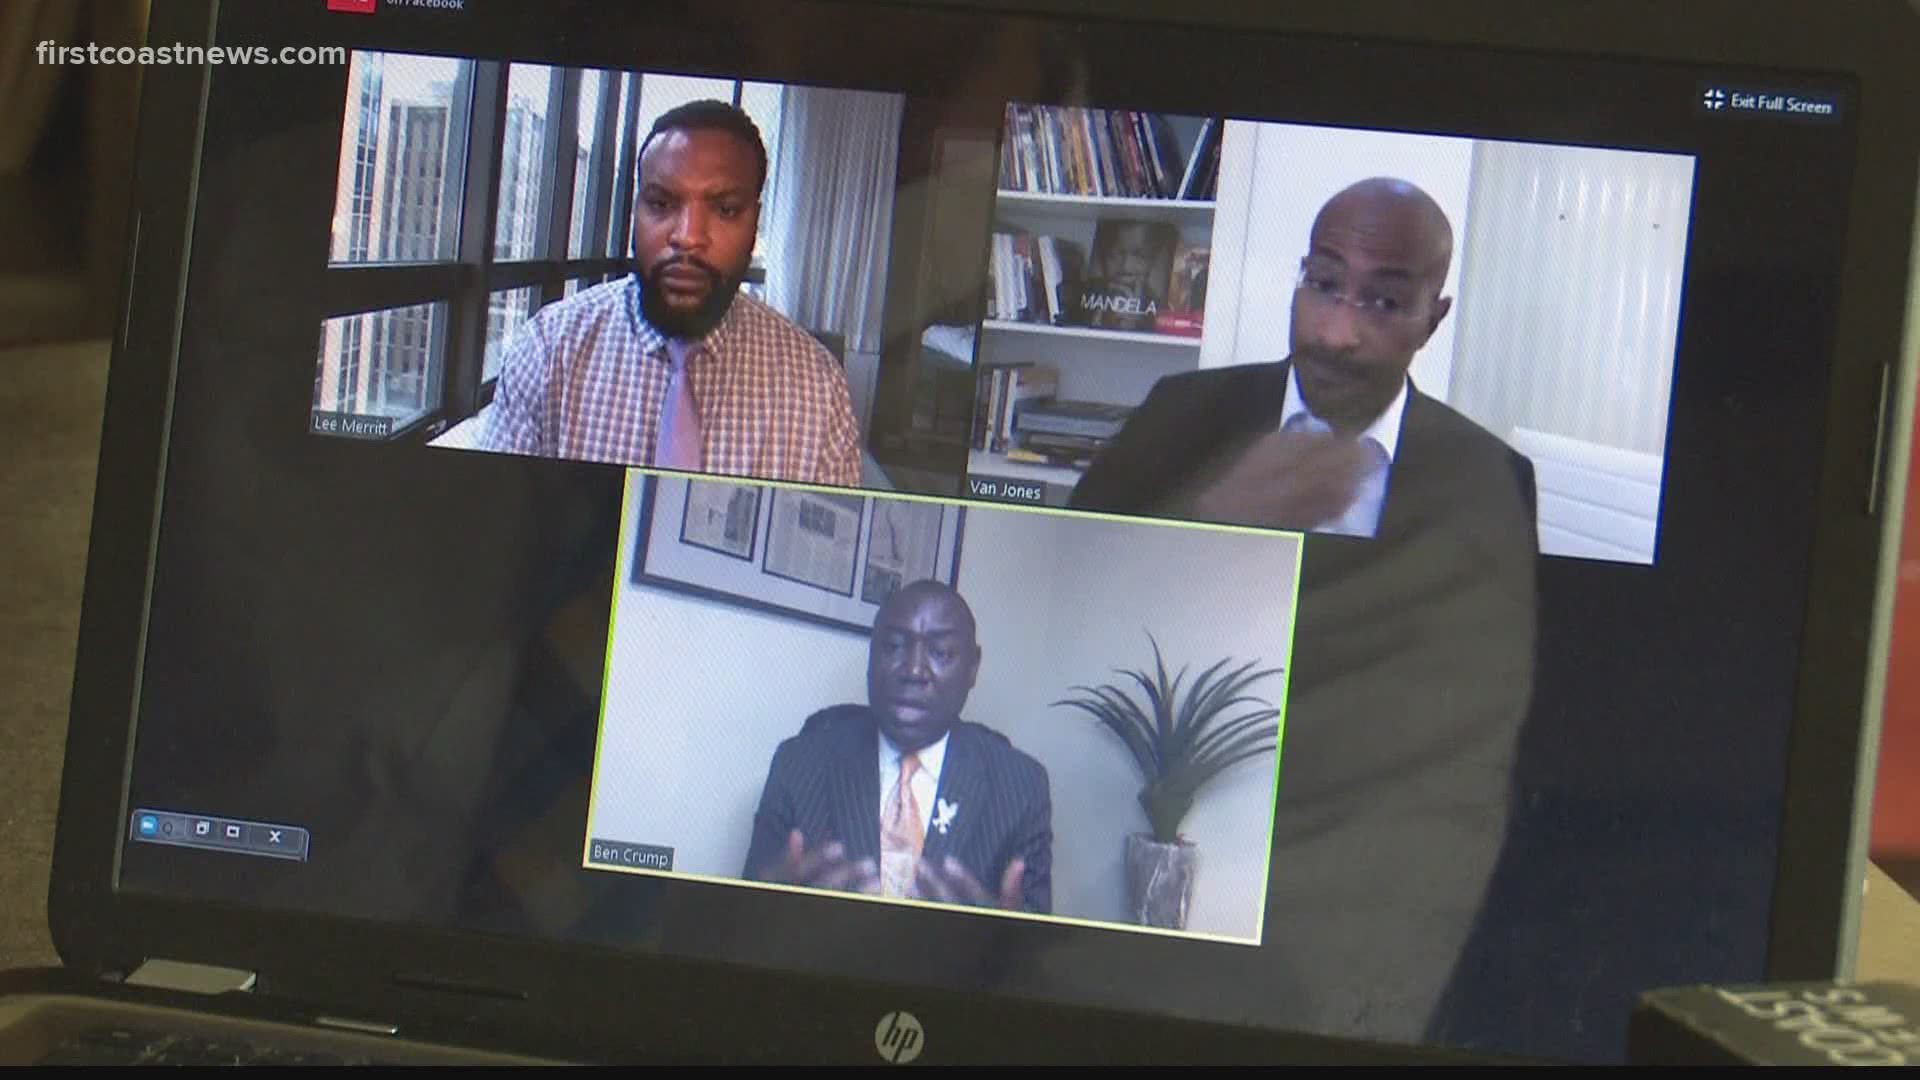 Civil rights attorneys representing all three families held a virtual press conference to discuss plans to pursue justice in the wake of the three deaths.